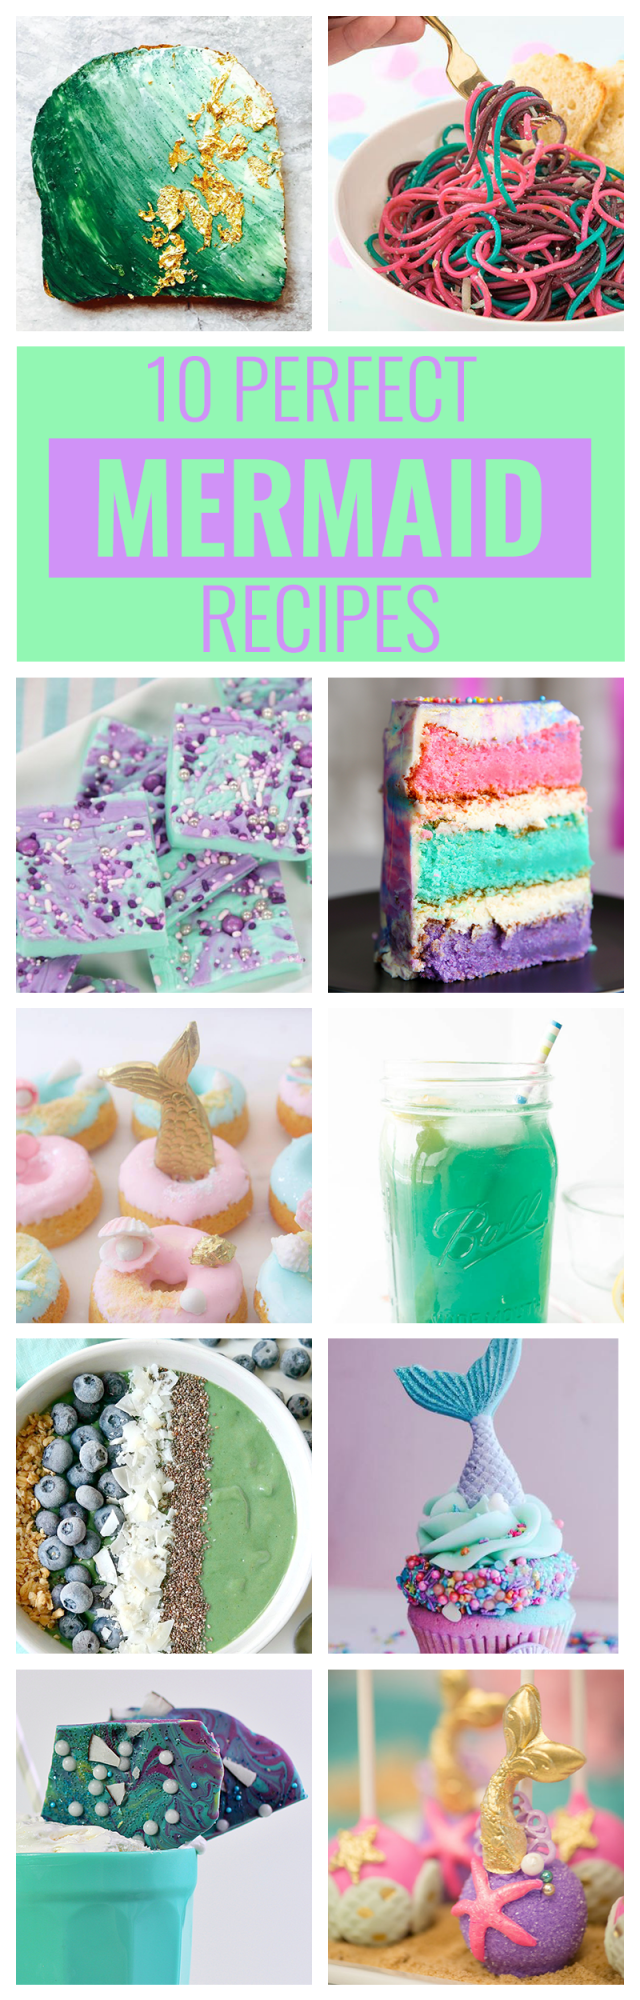 10 Mermaid Recipes for your Next Party